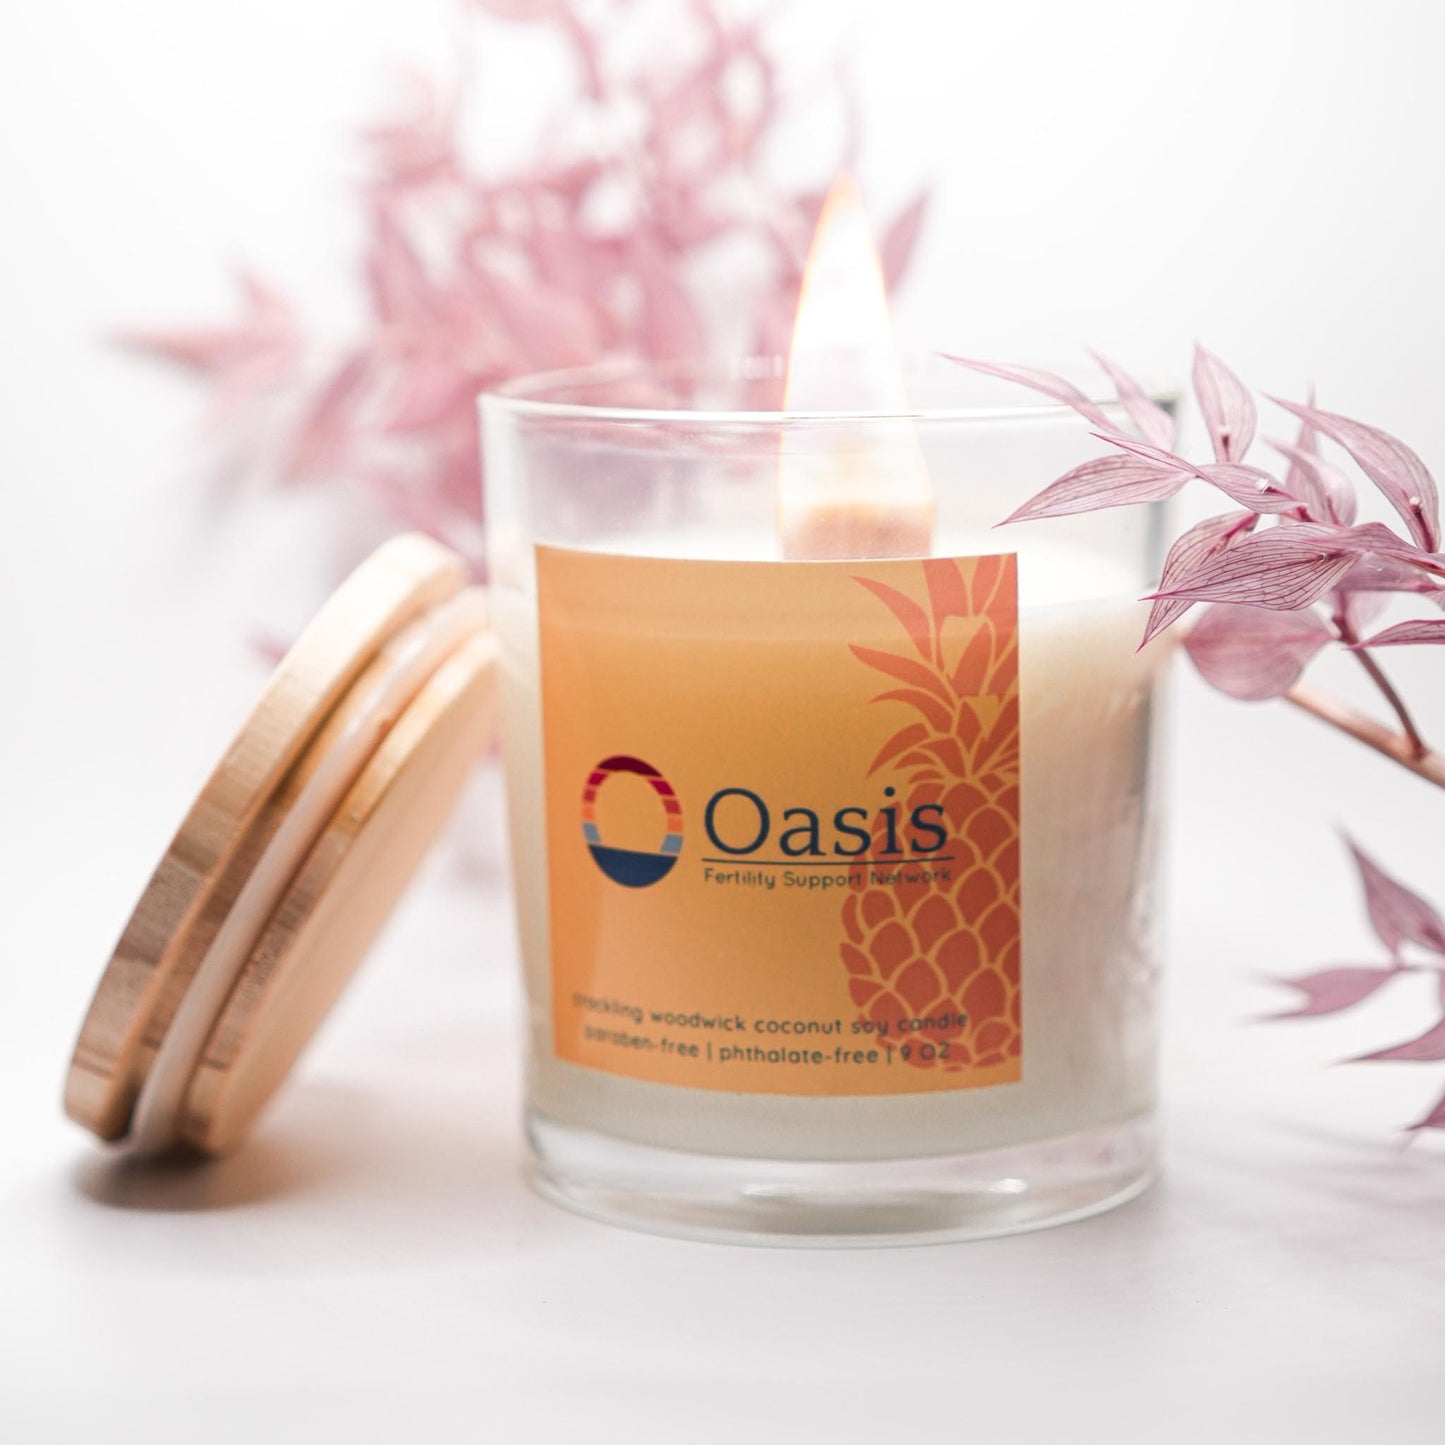 Crackling Woodwick Coconut Soy Candle